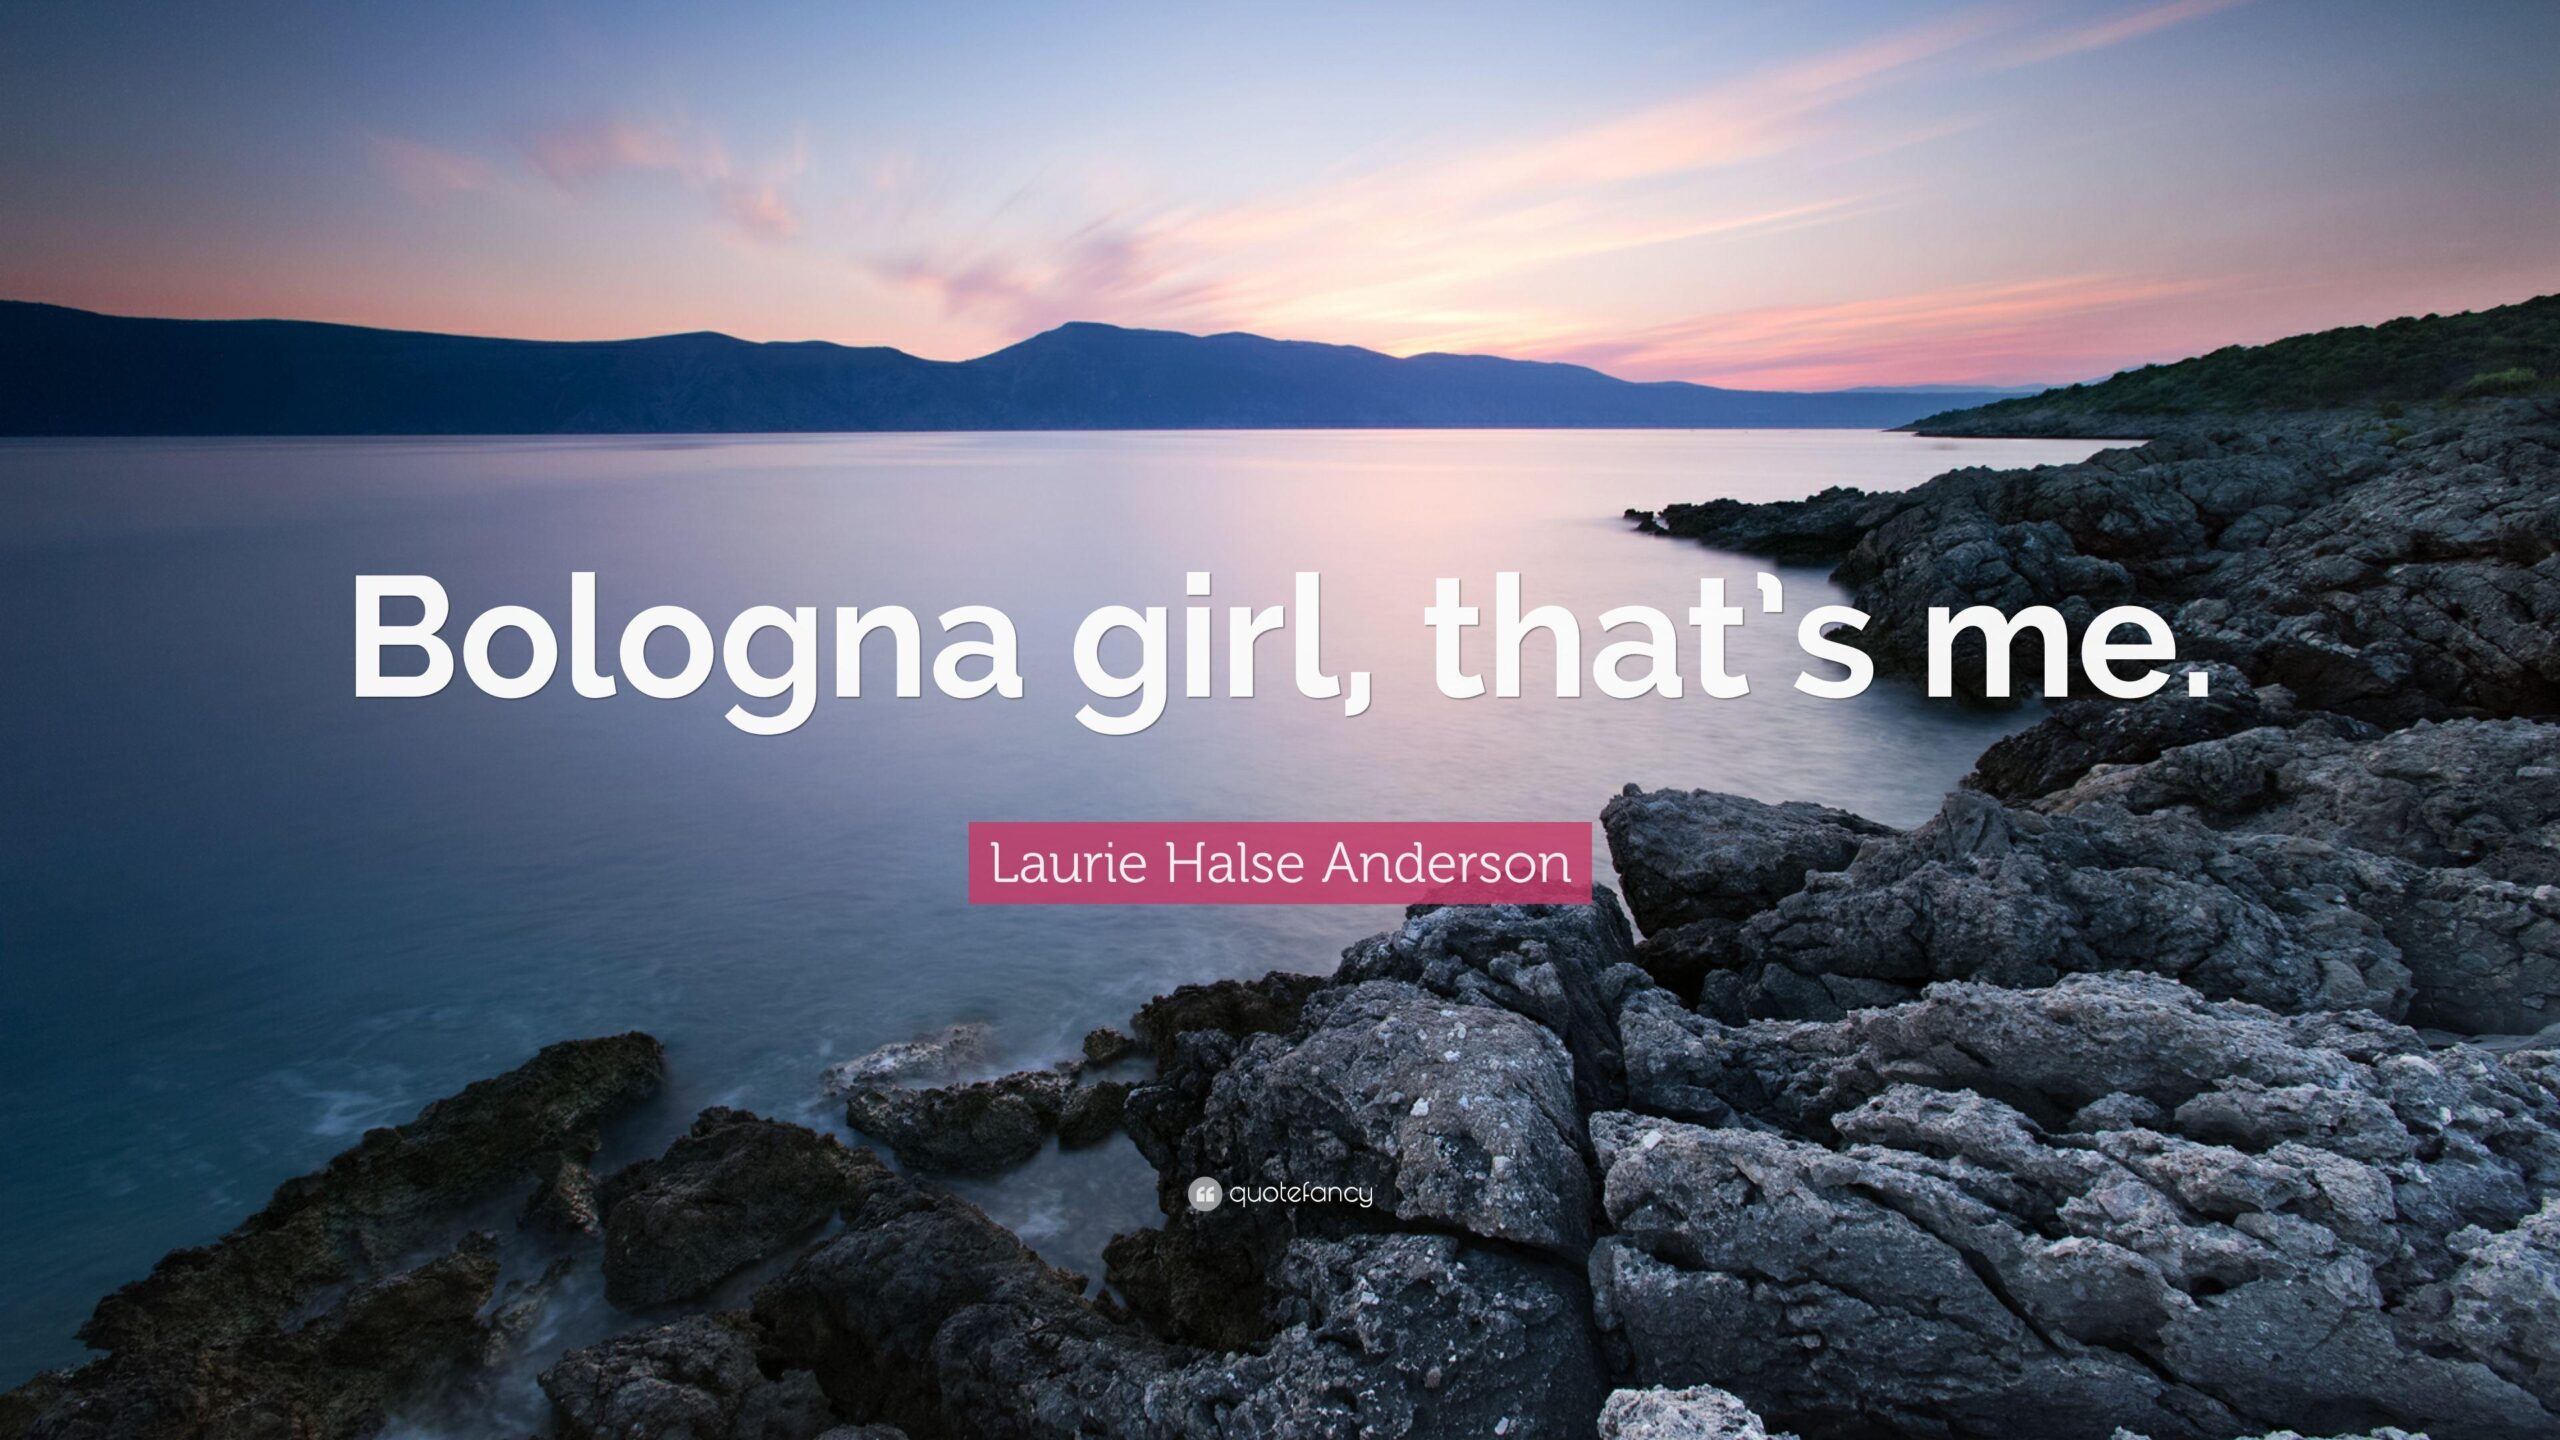 Laurie Halse Anderson Quote “Bologna girl, that’s me”